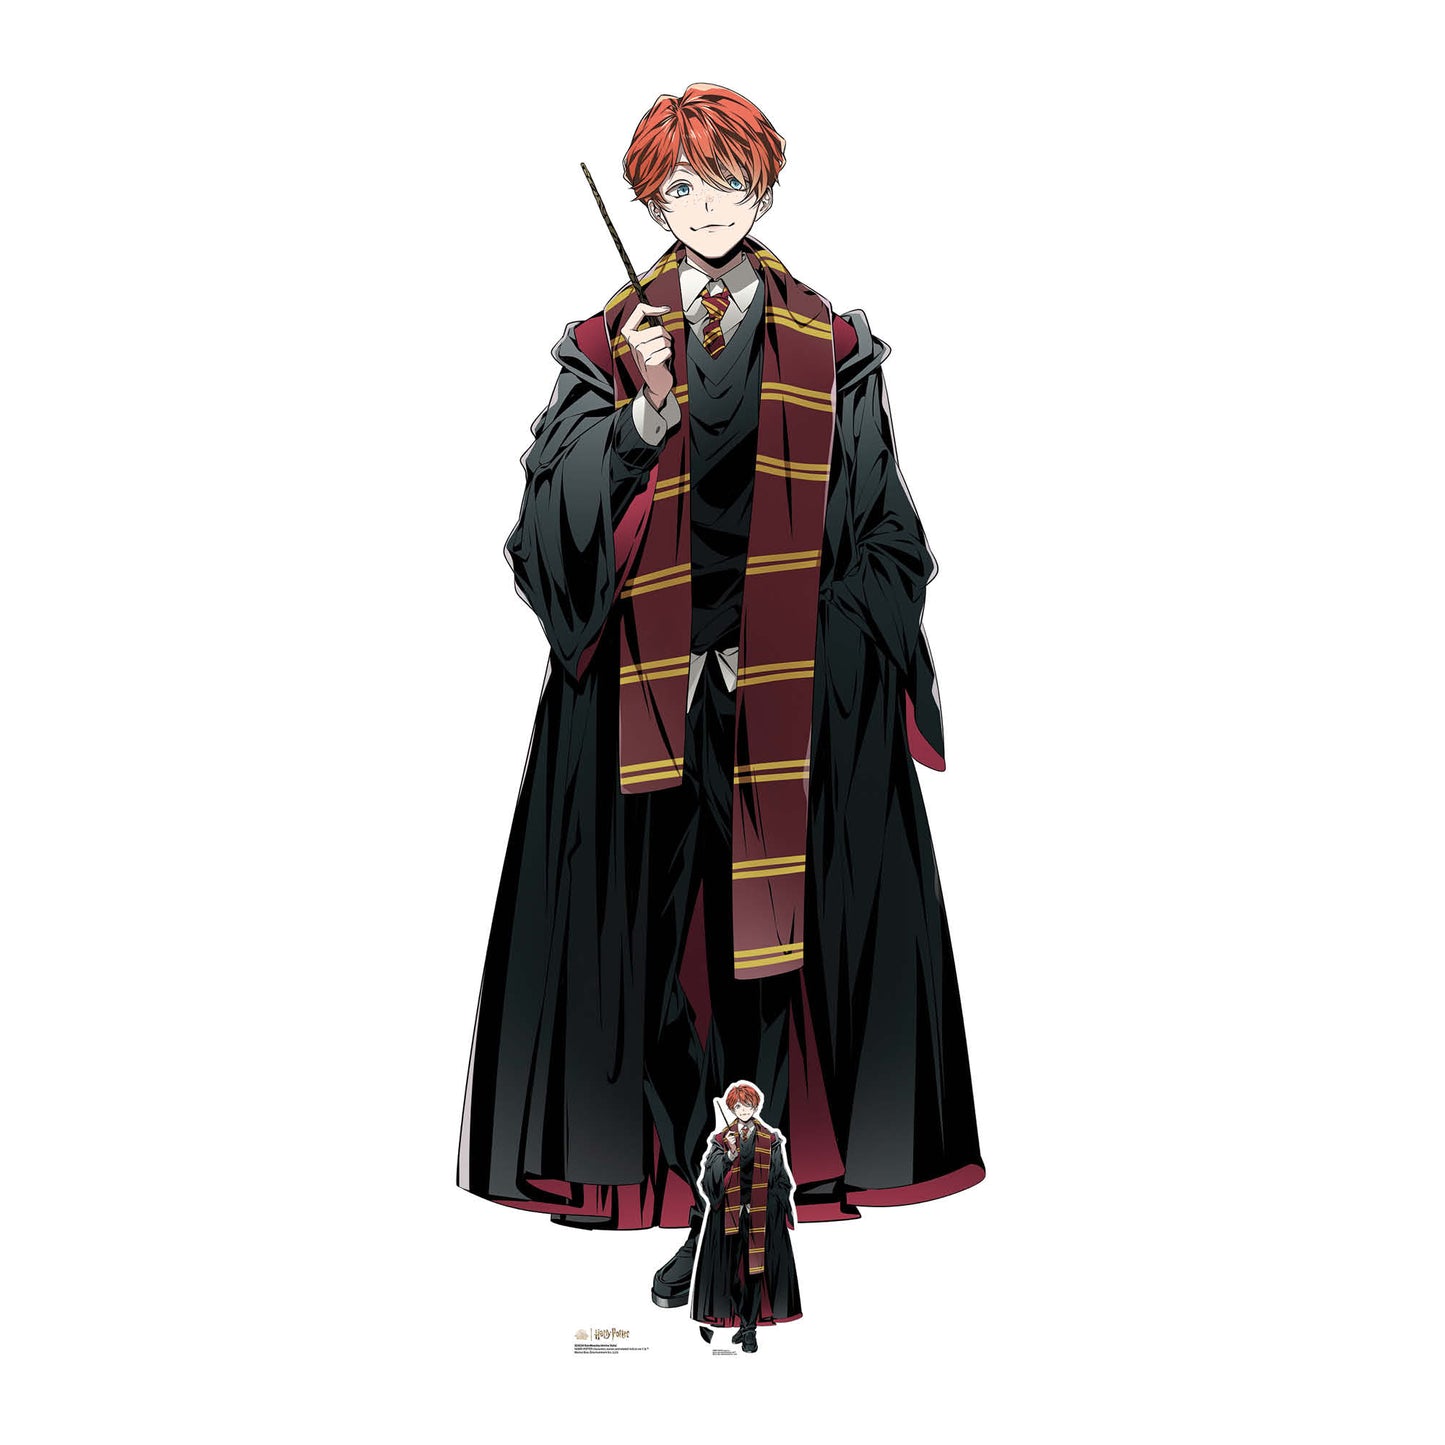 SC4234 Ron Weasley Anime Style Cardboard Cut Out Height 175cm